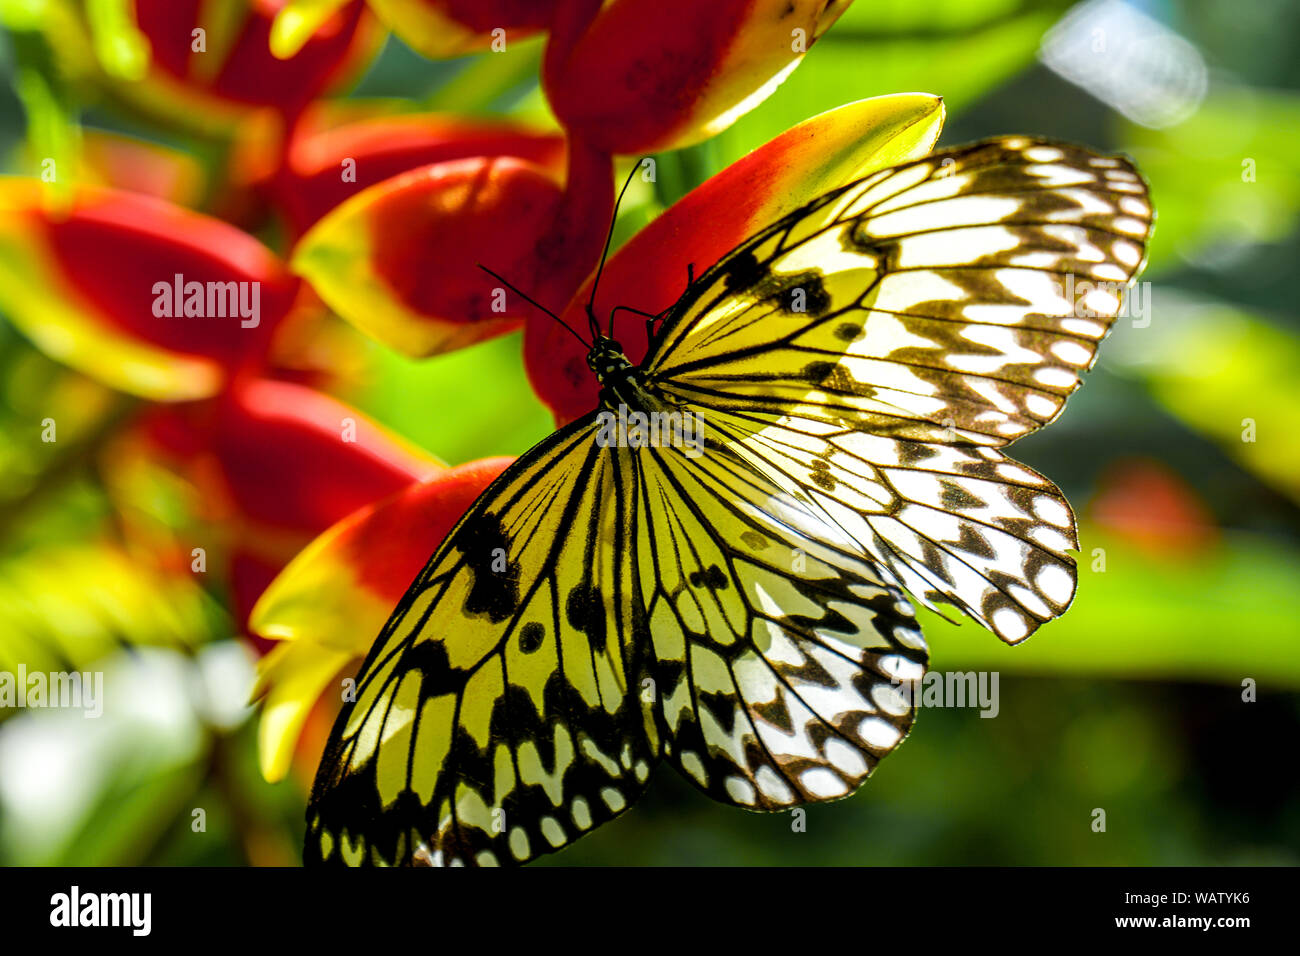 A Butterfly from the Philippines, shot in Bohol Island nearby a Forest. Yellow and Black Butterfly sitting on a red colored Flower. Stock Photo